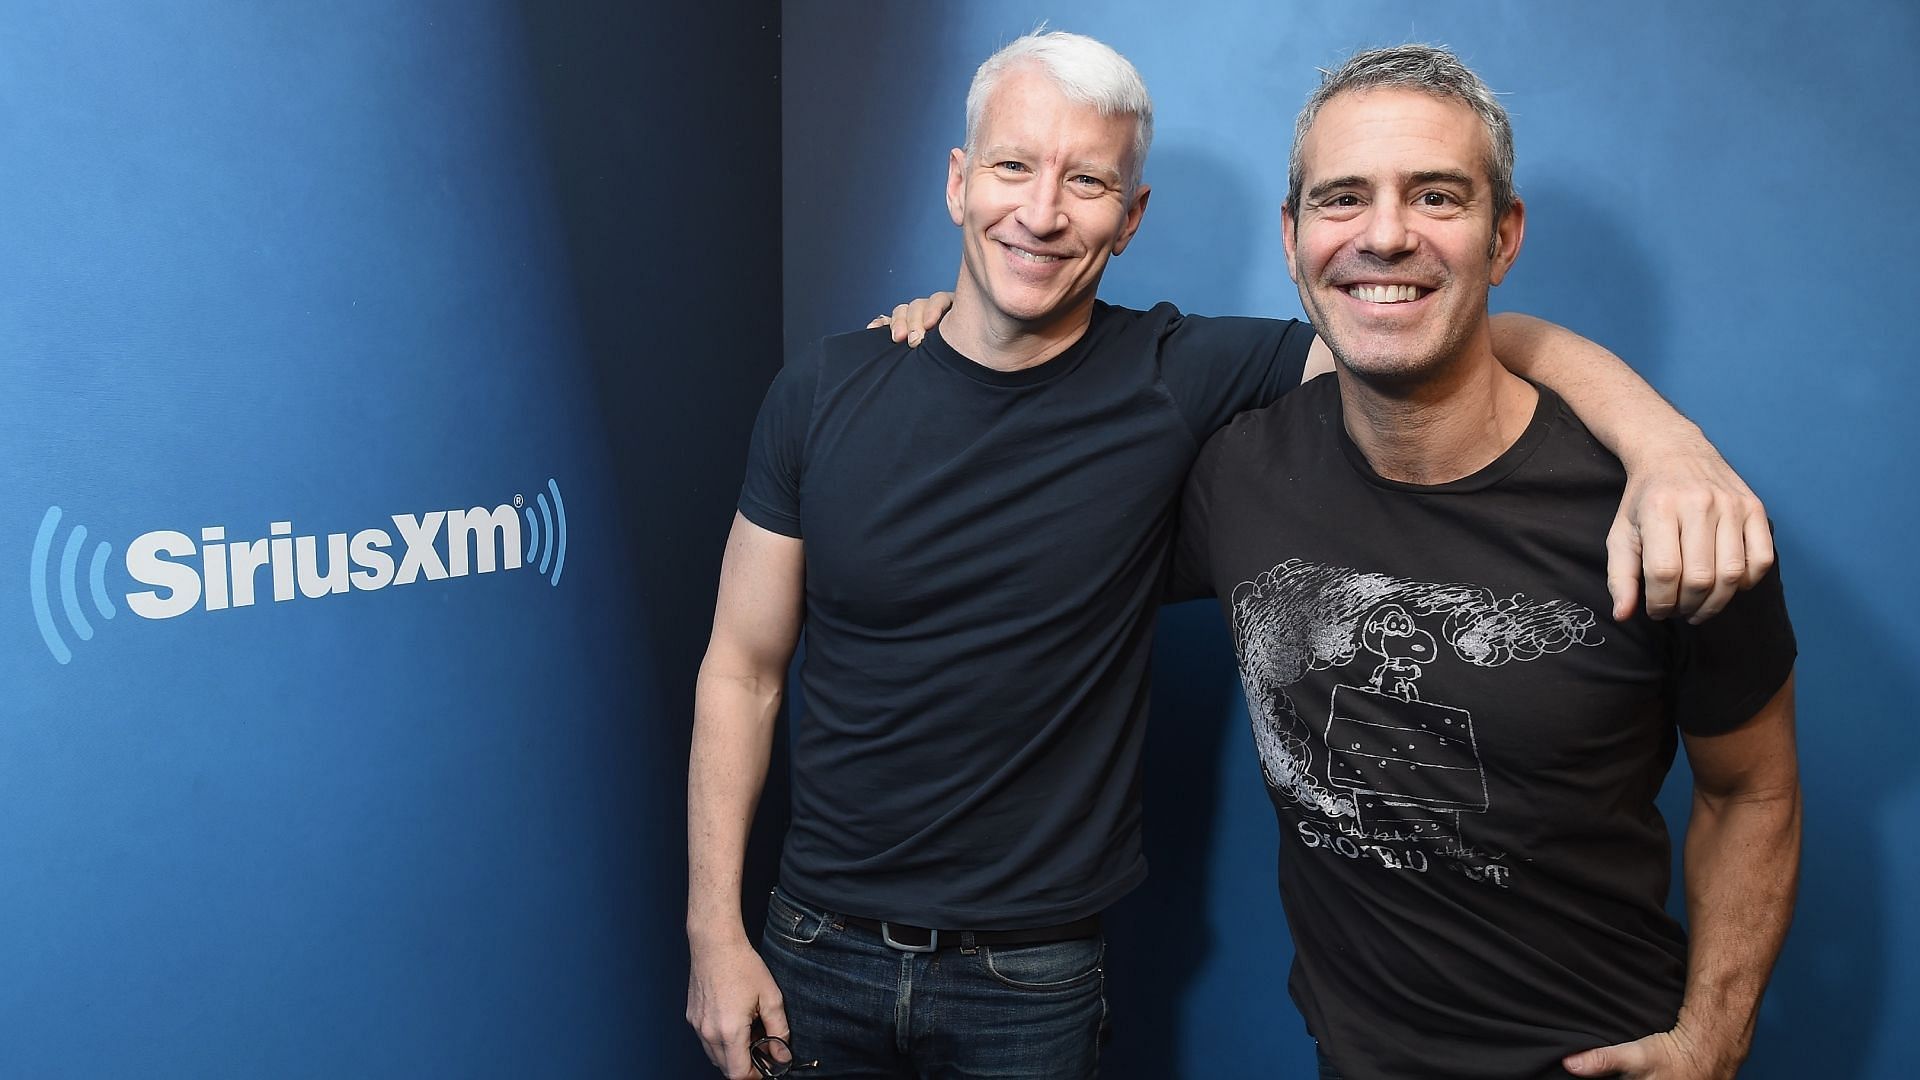 Anderson Cooper and Andy Cohen net worth. (Image via Getty)